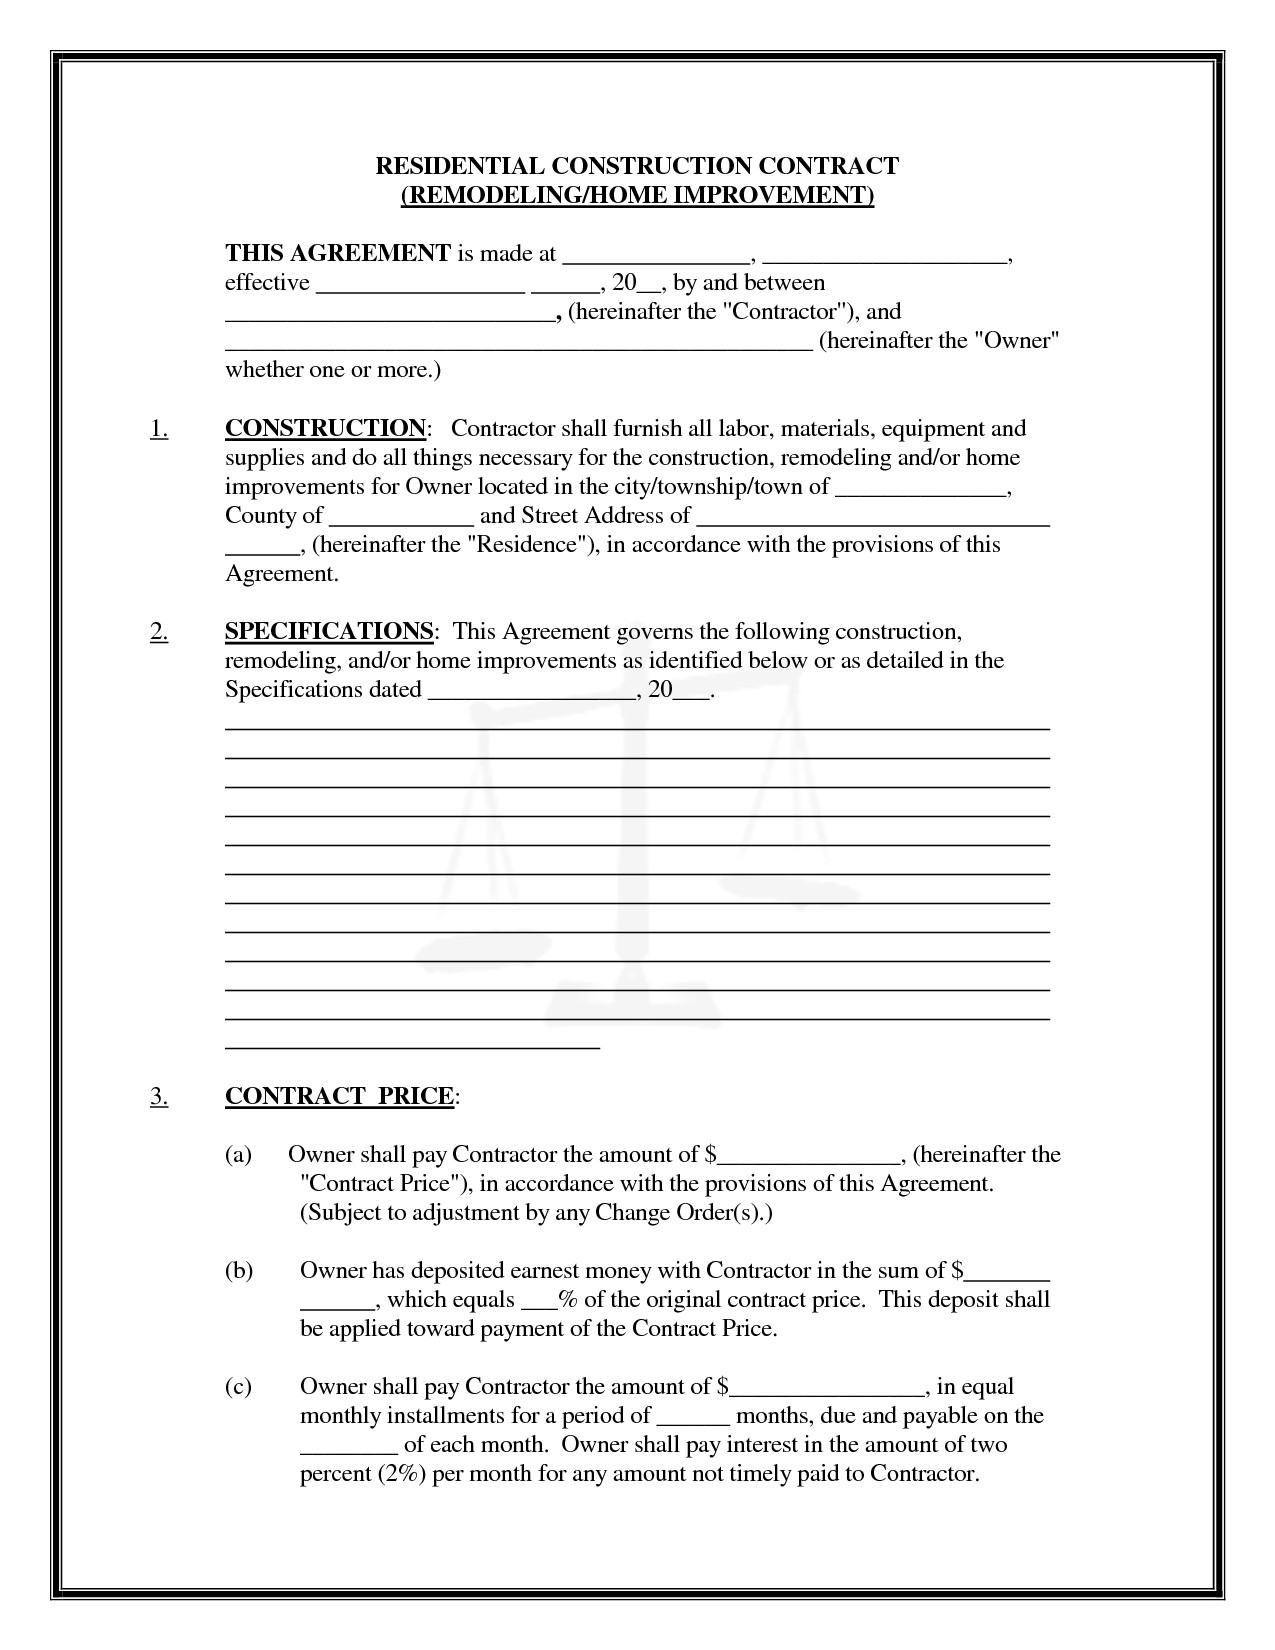 Home Improvement Contract Template Pics Of Residential Construction Contracts